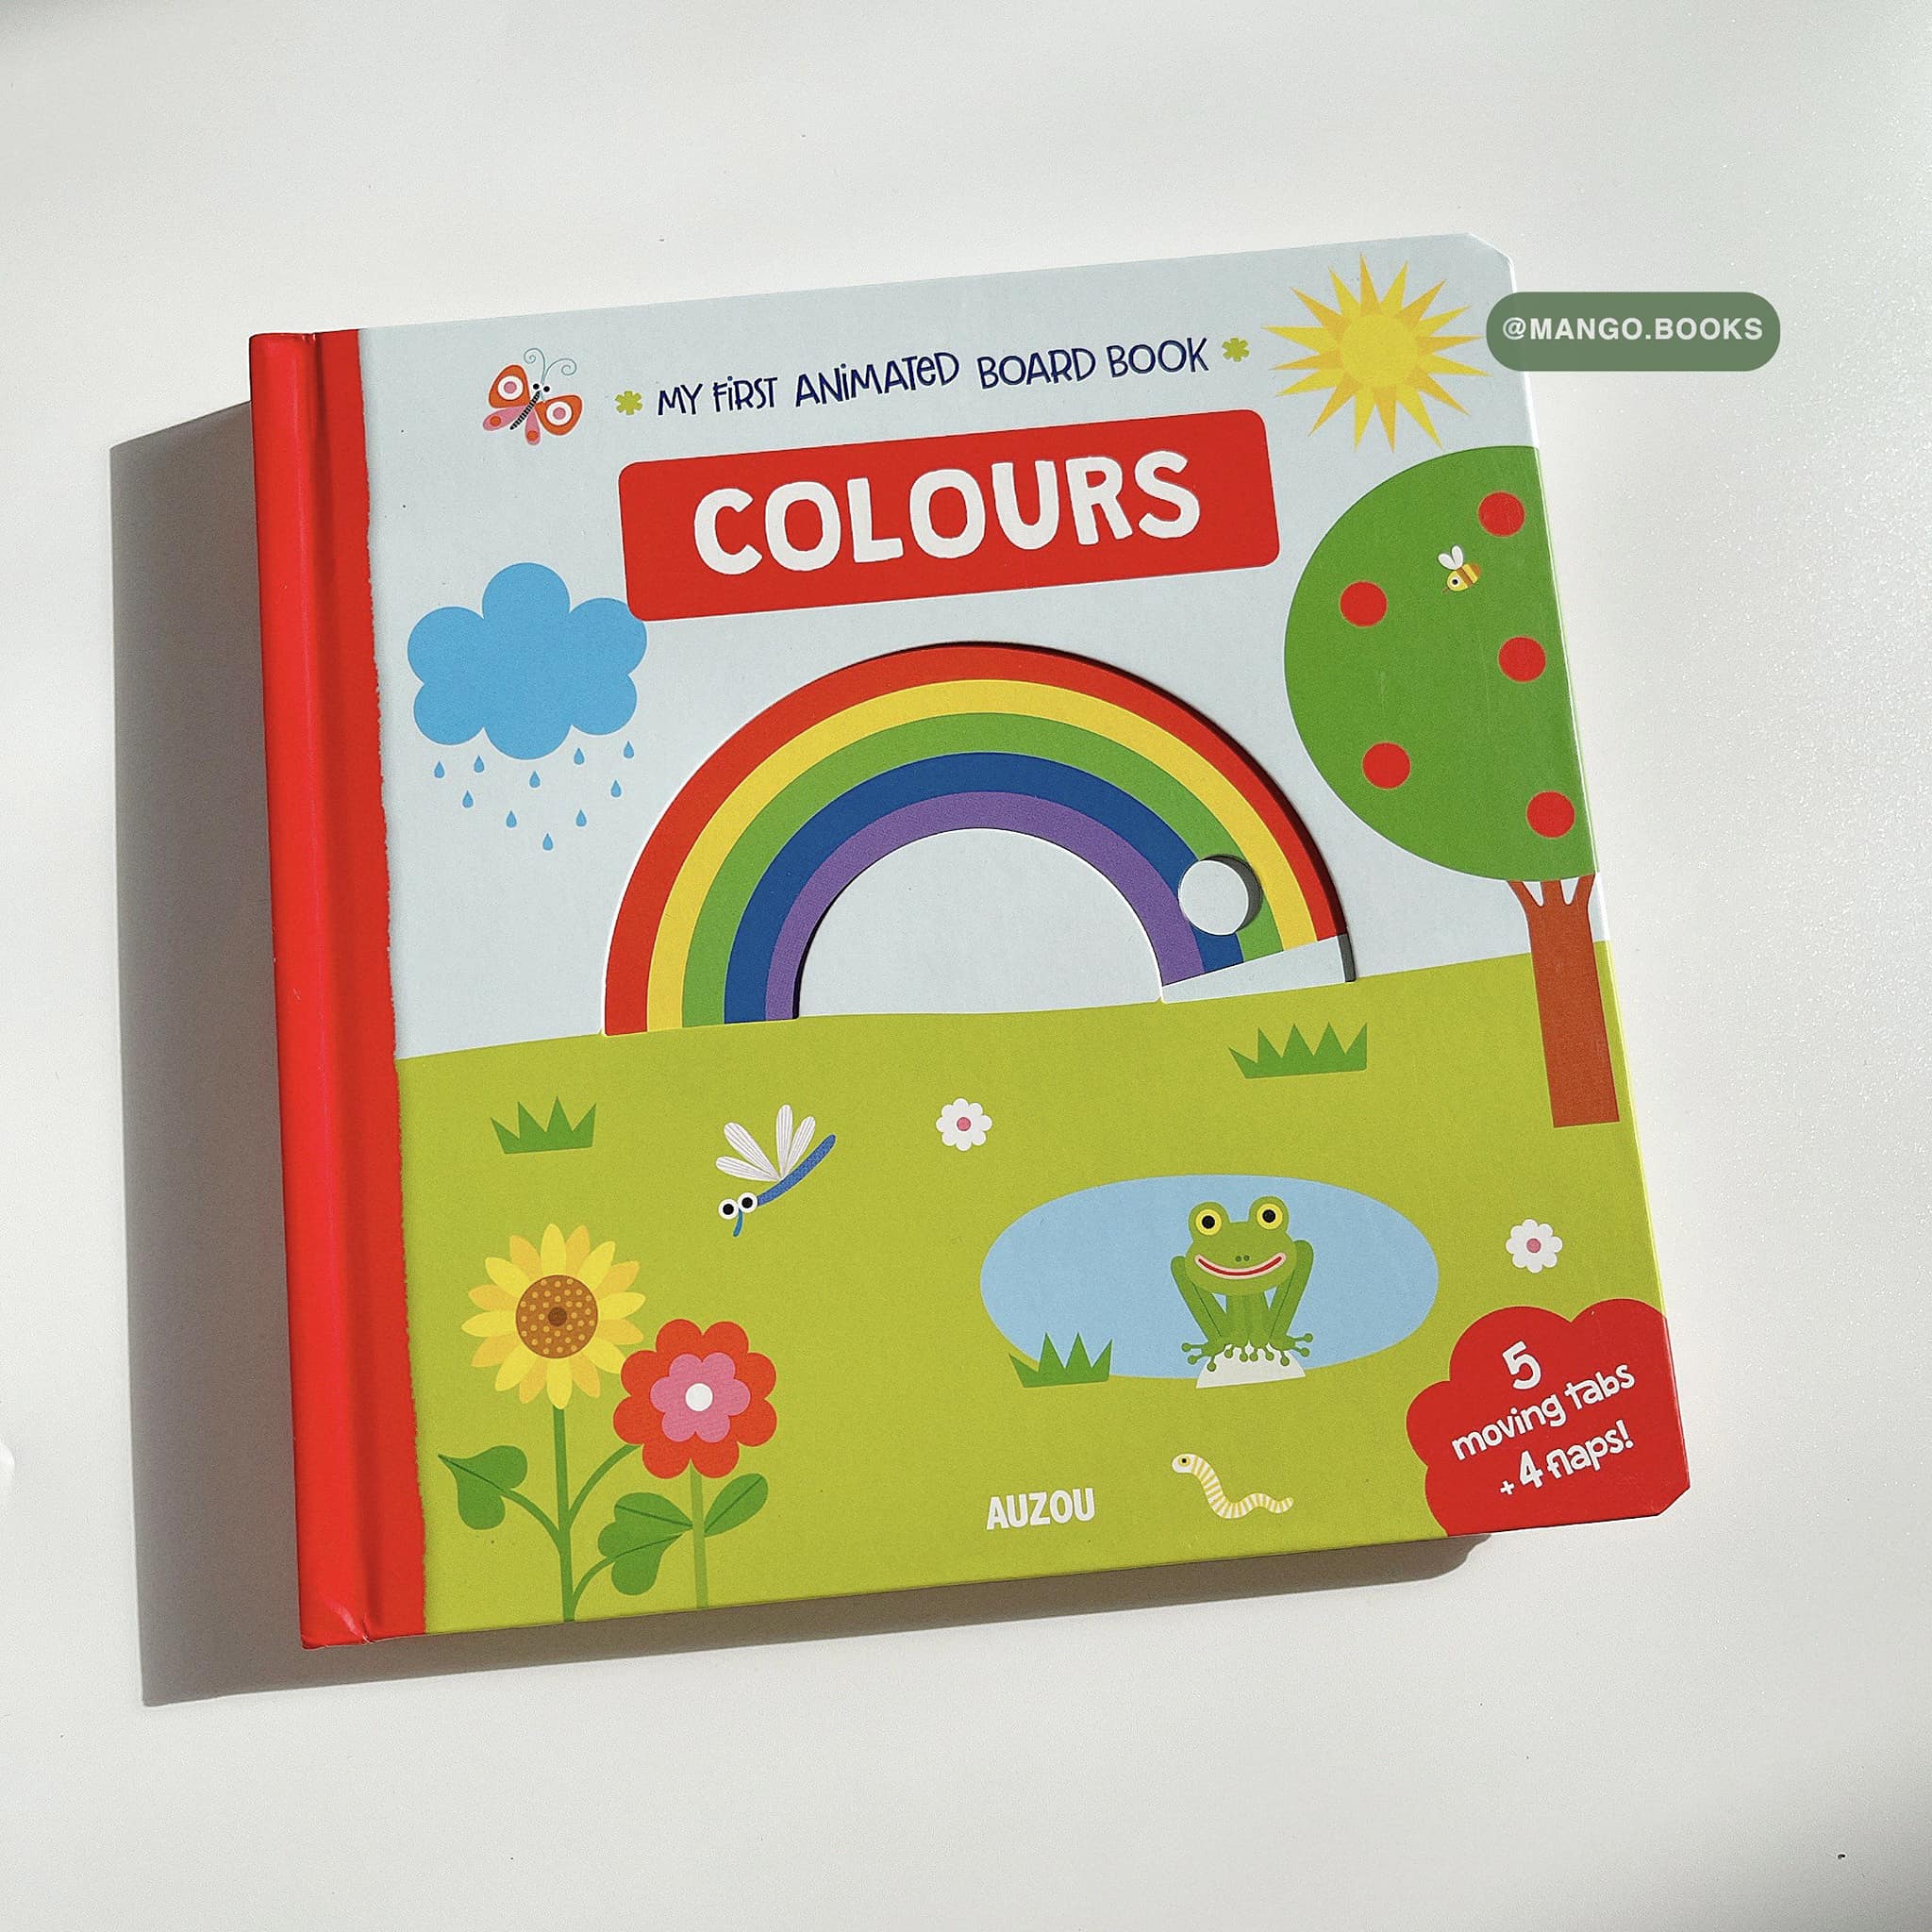 My First Animated Board Book: Colours